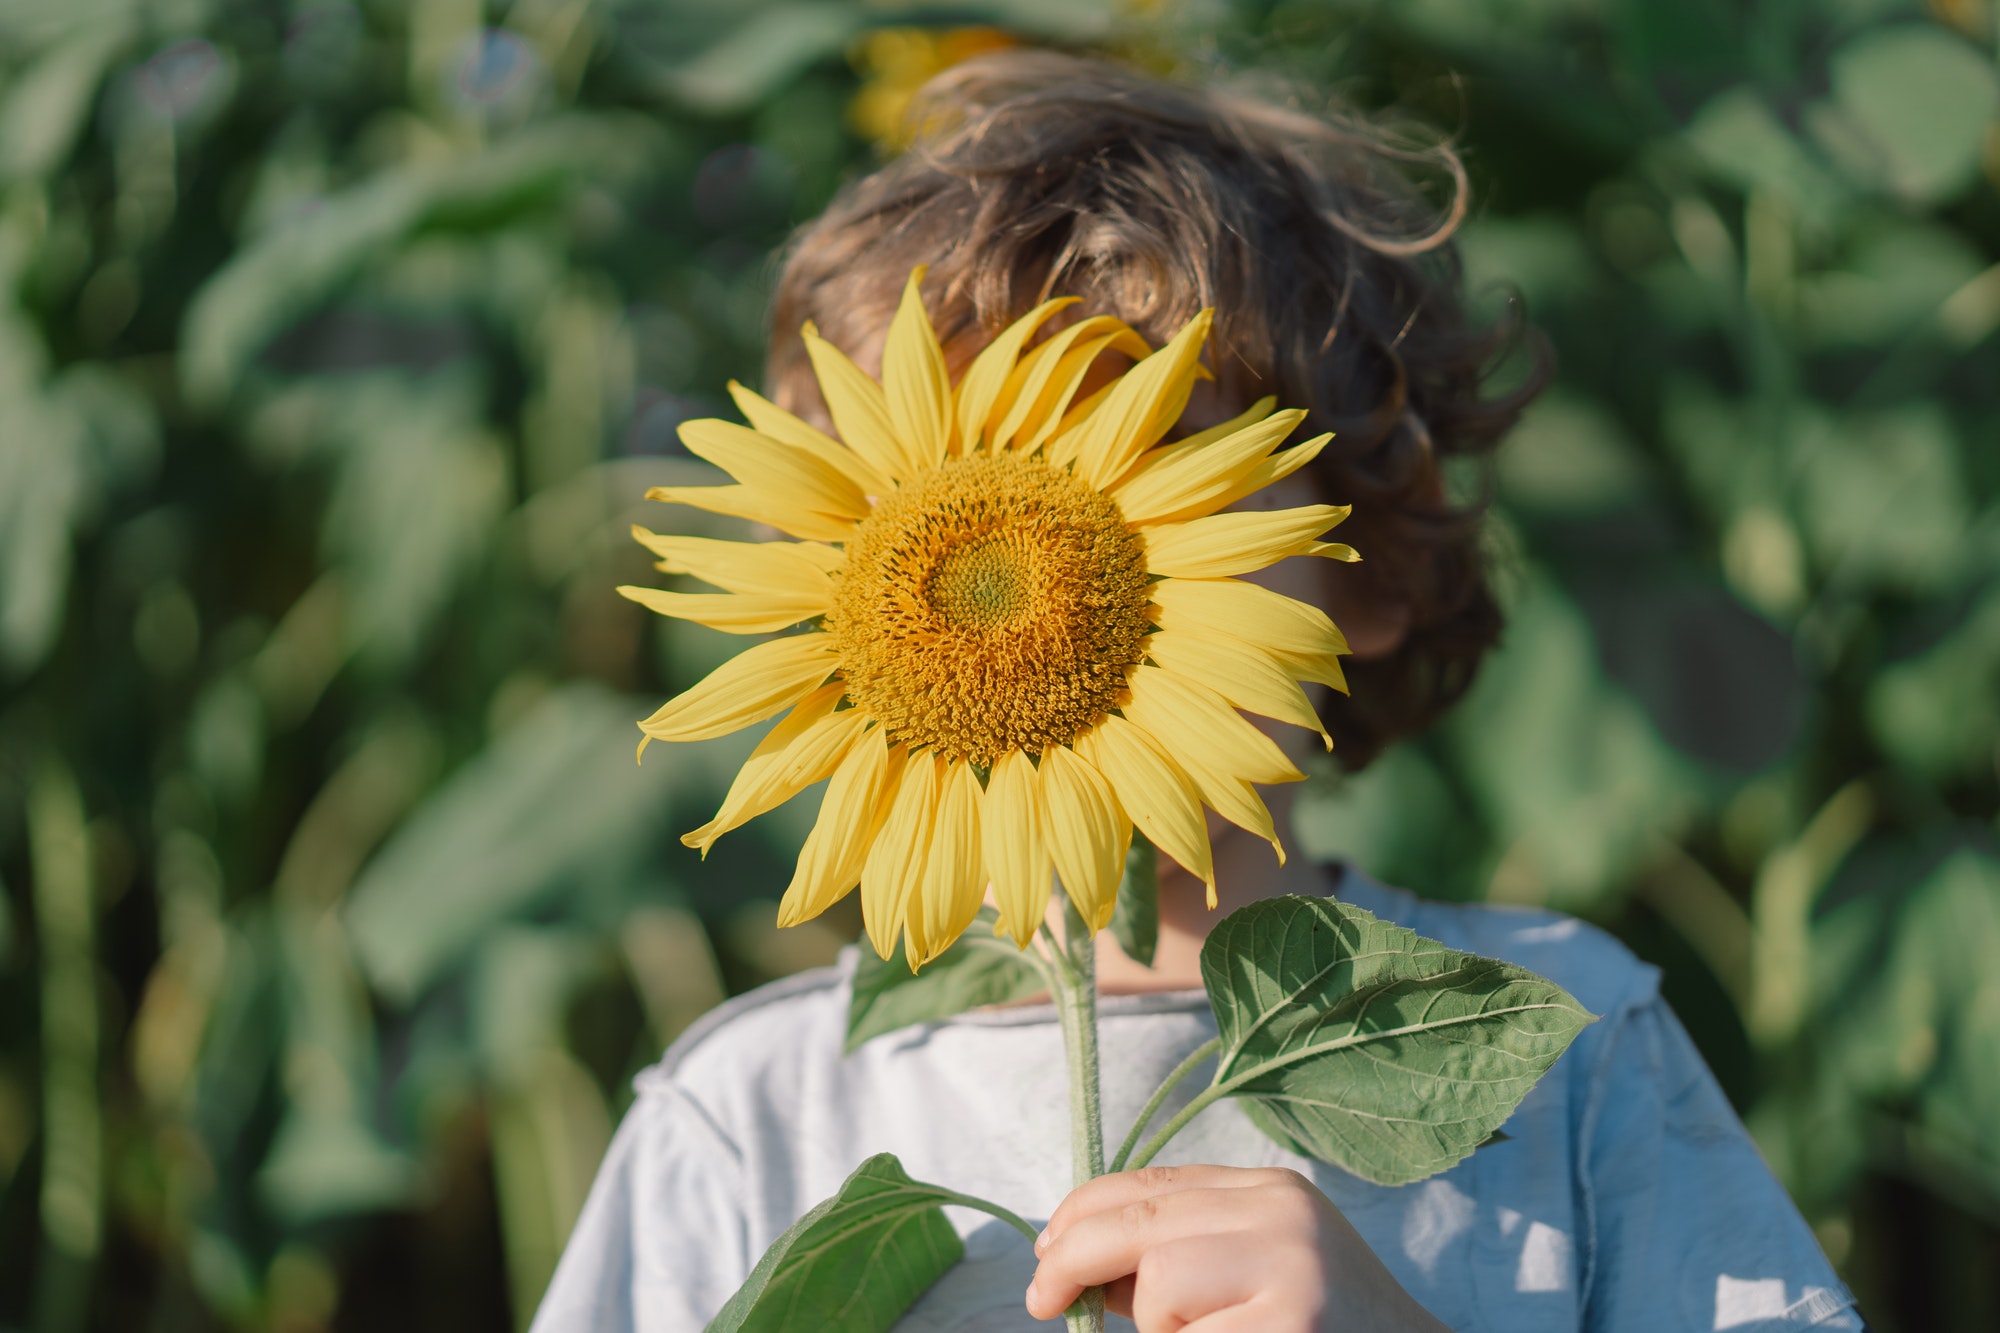 Little boy with sunflowers. Children and nature